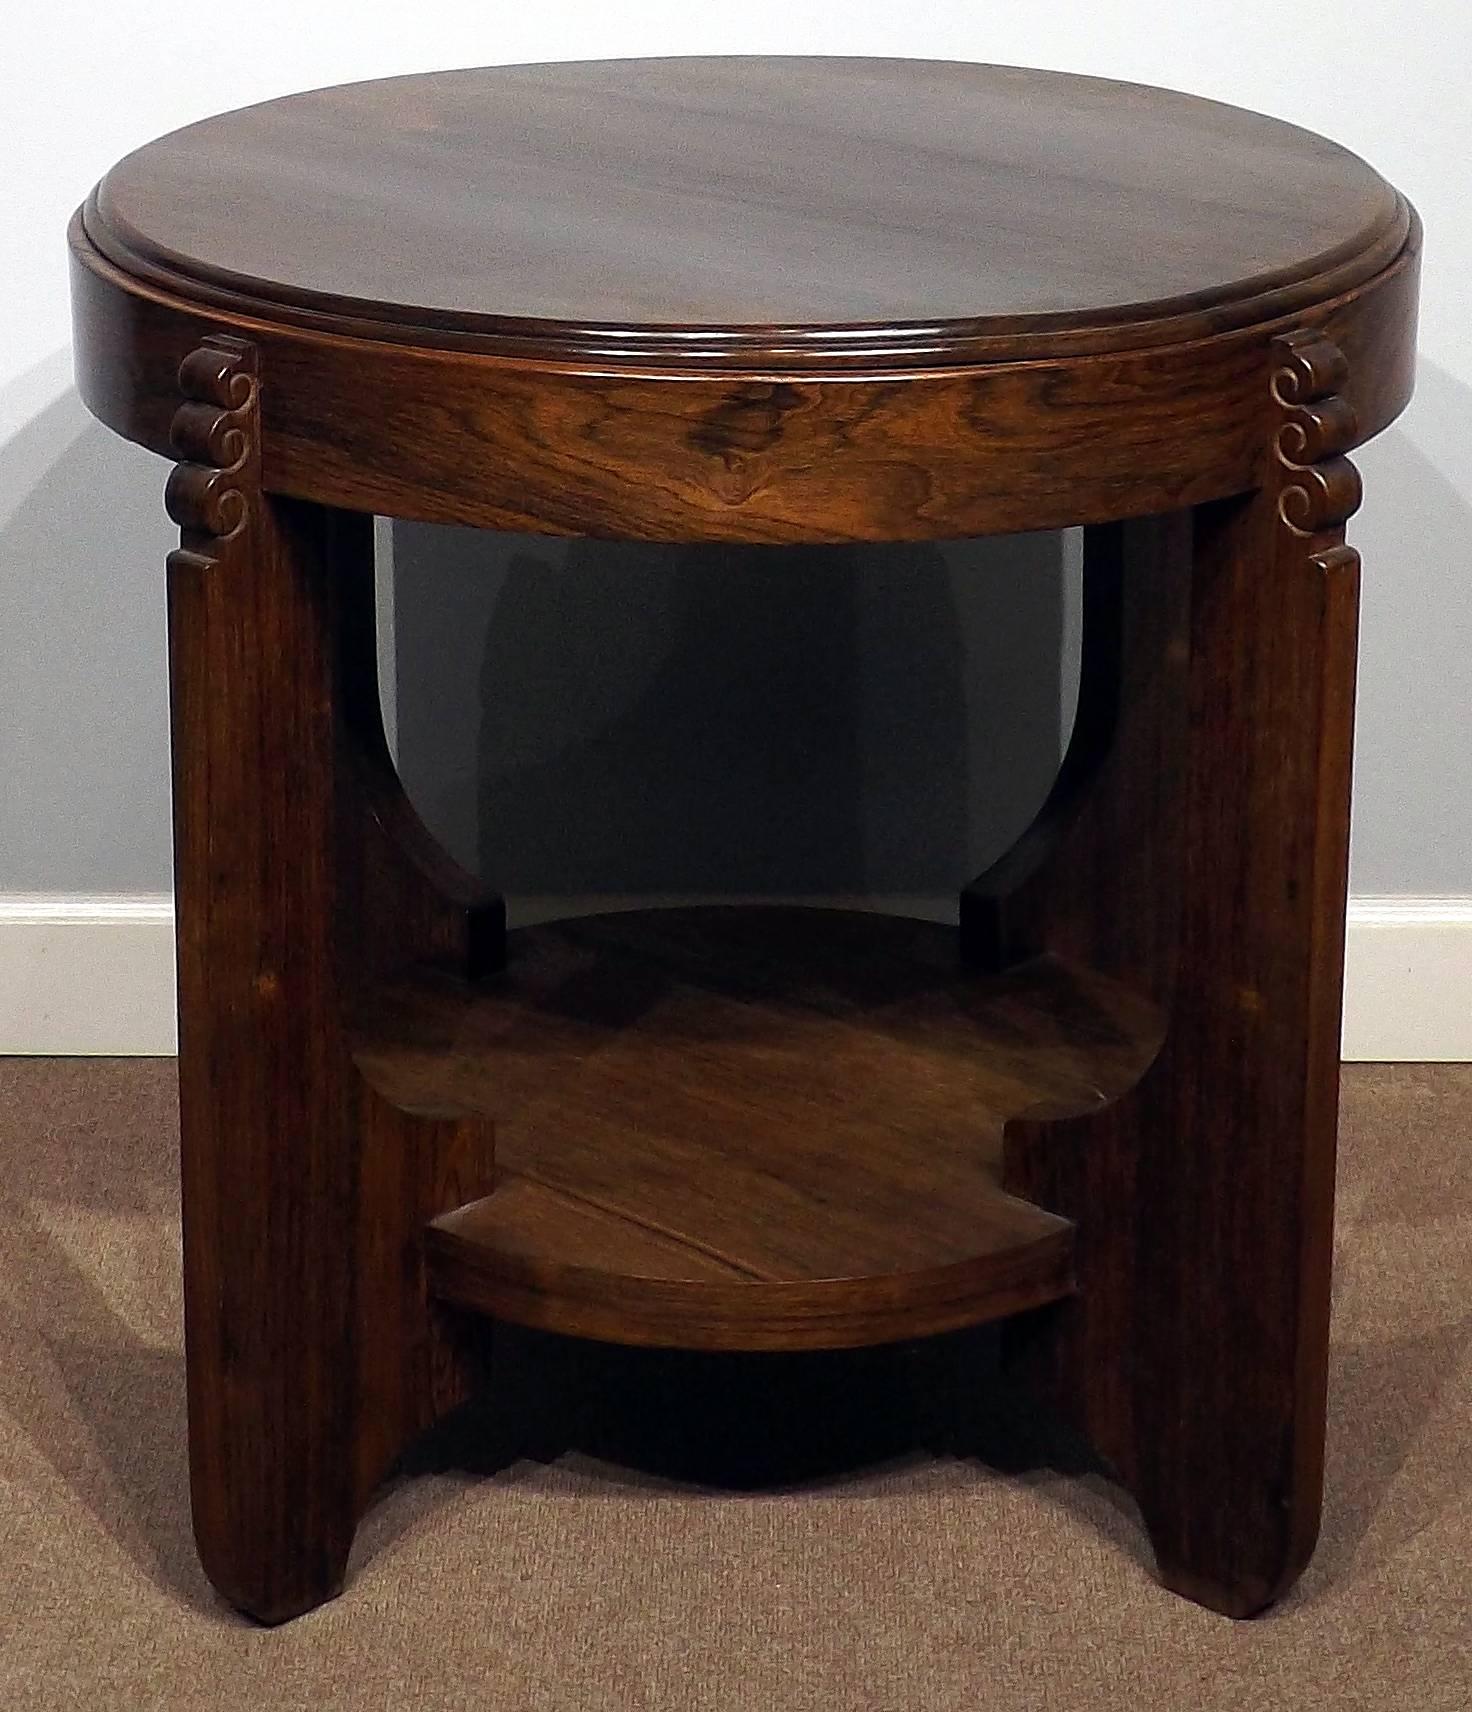 A very nice side table in the style of the Amsterdam Modernism, with a very slight oval design. The table is ornately carved on the legs and has a beautiful finish. It stands 27 1/2 inches tall and the diameter is 30 1/2 inches at it's widest.